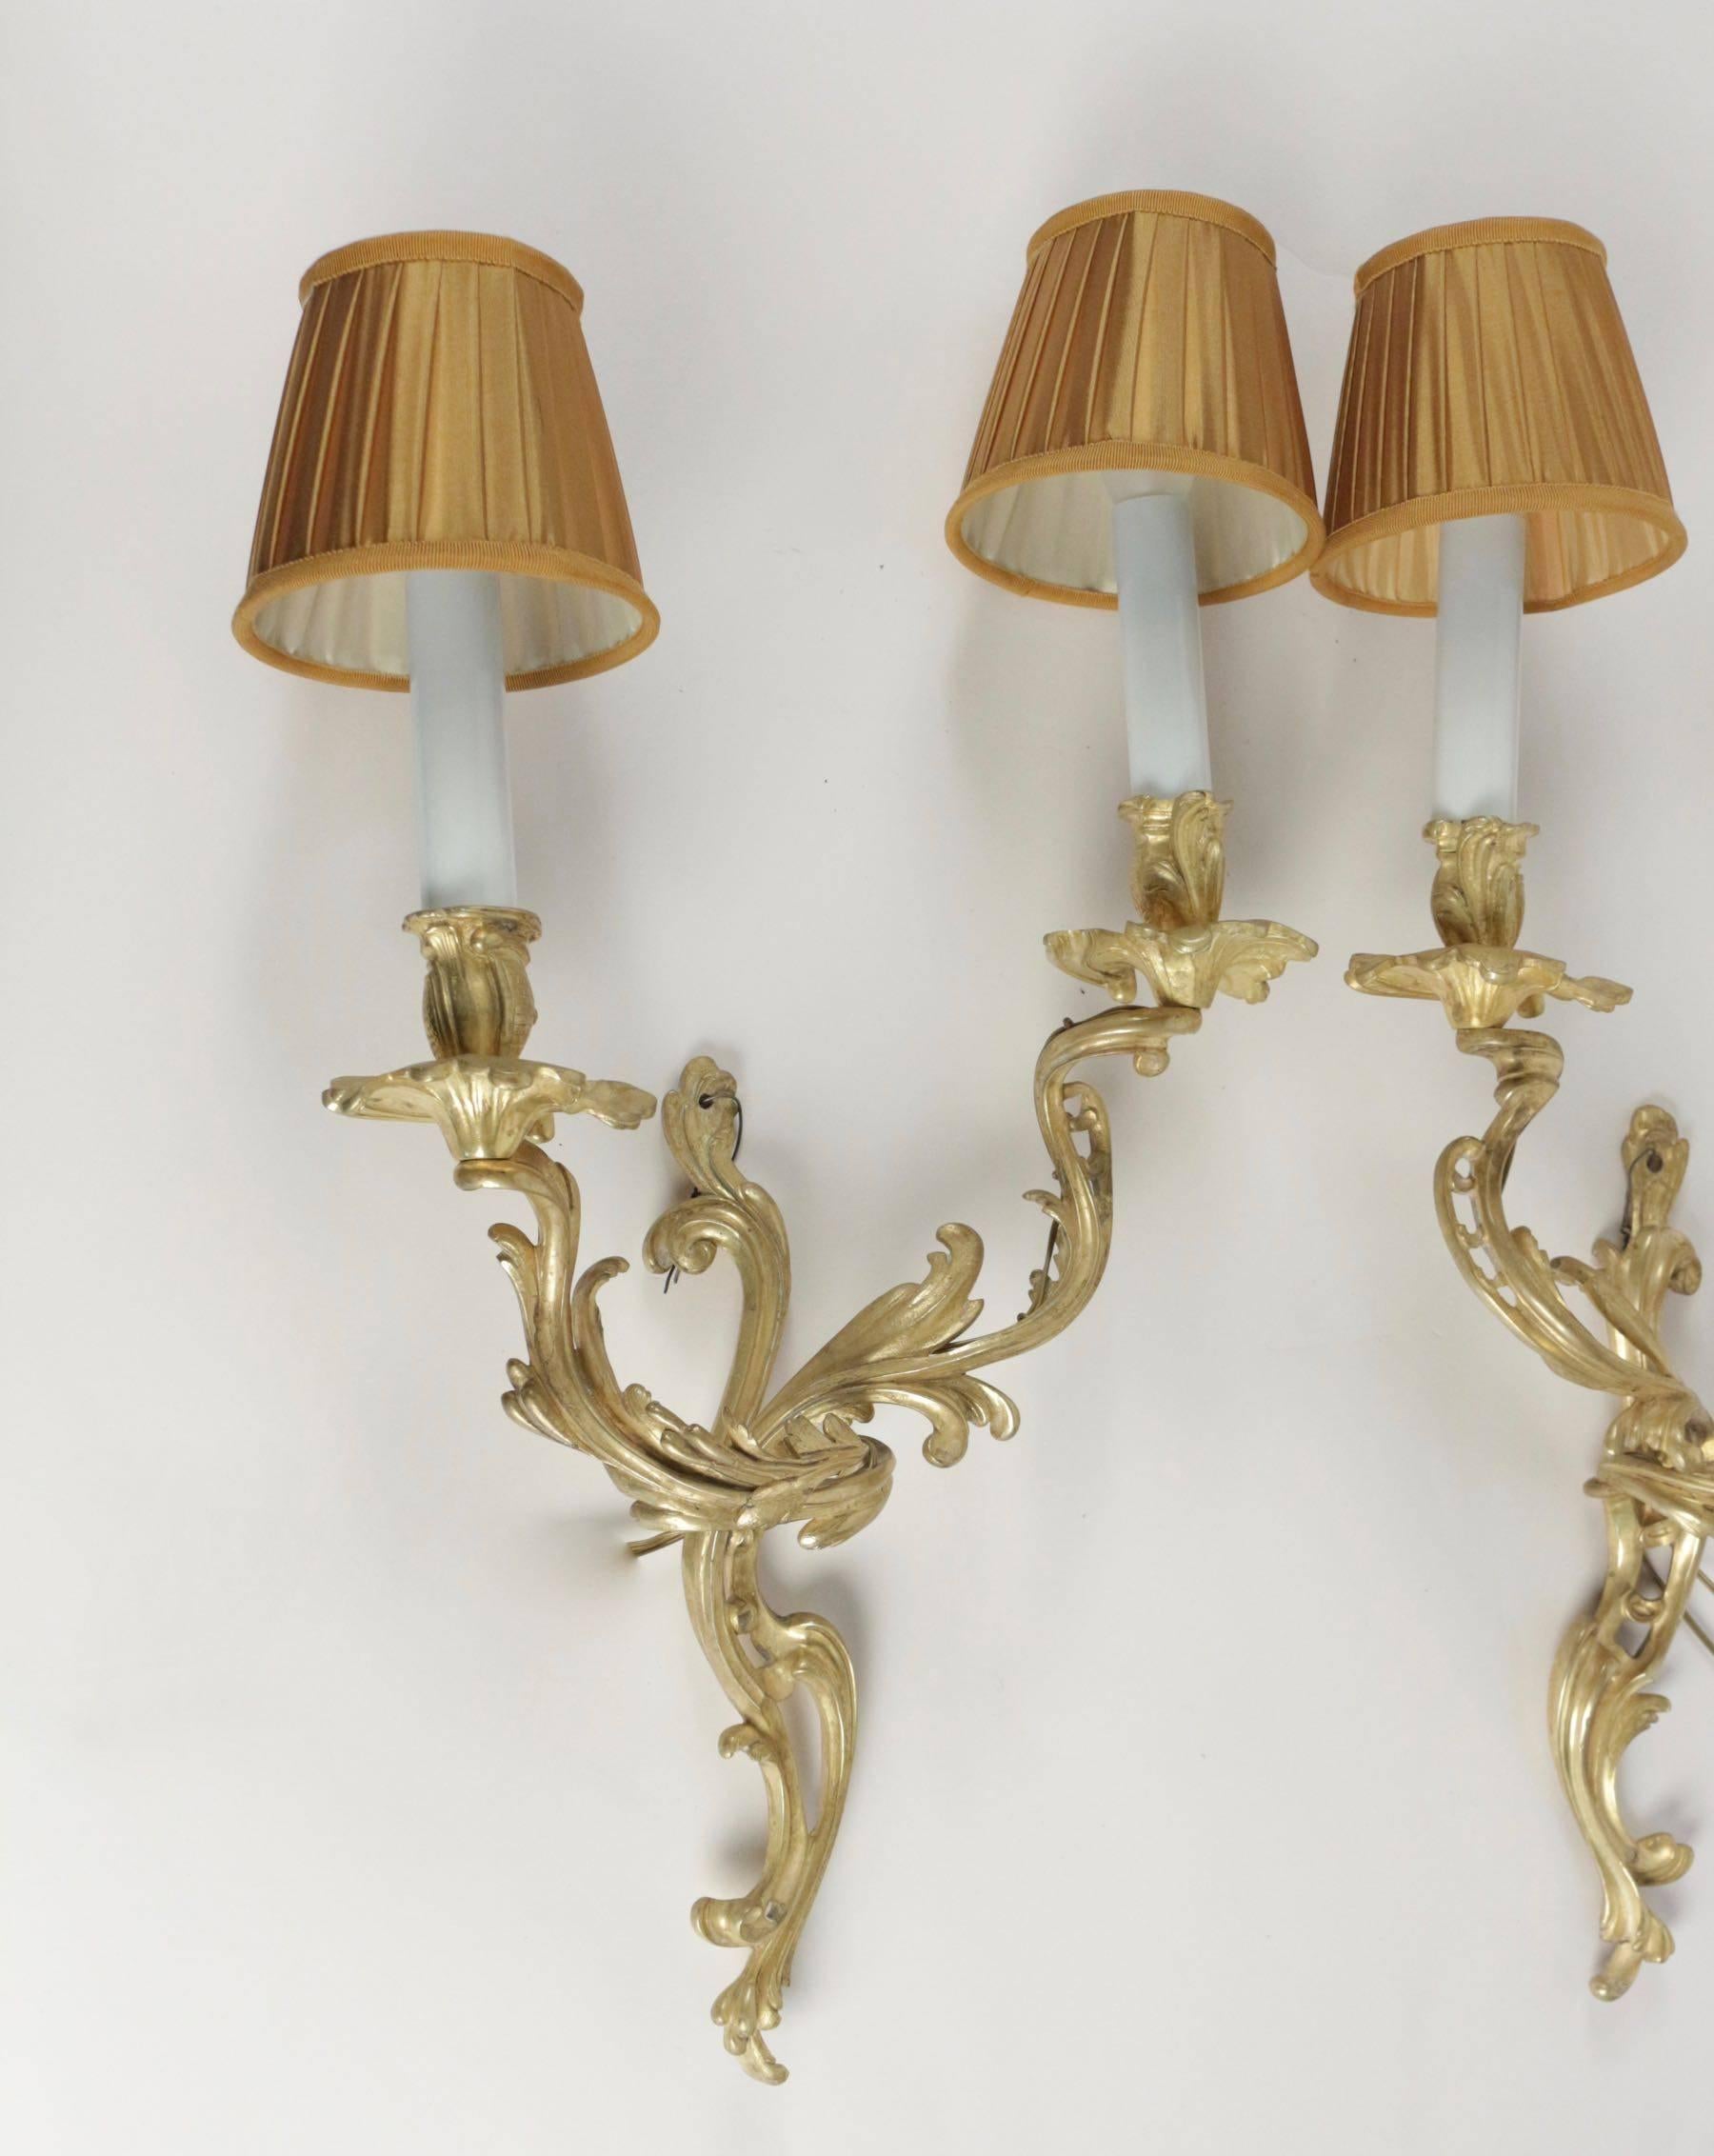 The pair of bronze doré sconces in the style of Louis XV from the 19th century. Candlestick in opaline porcelain.